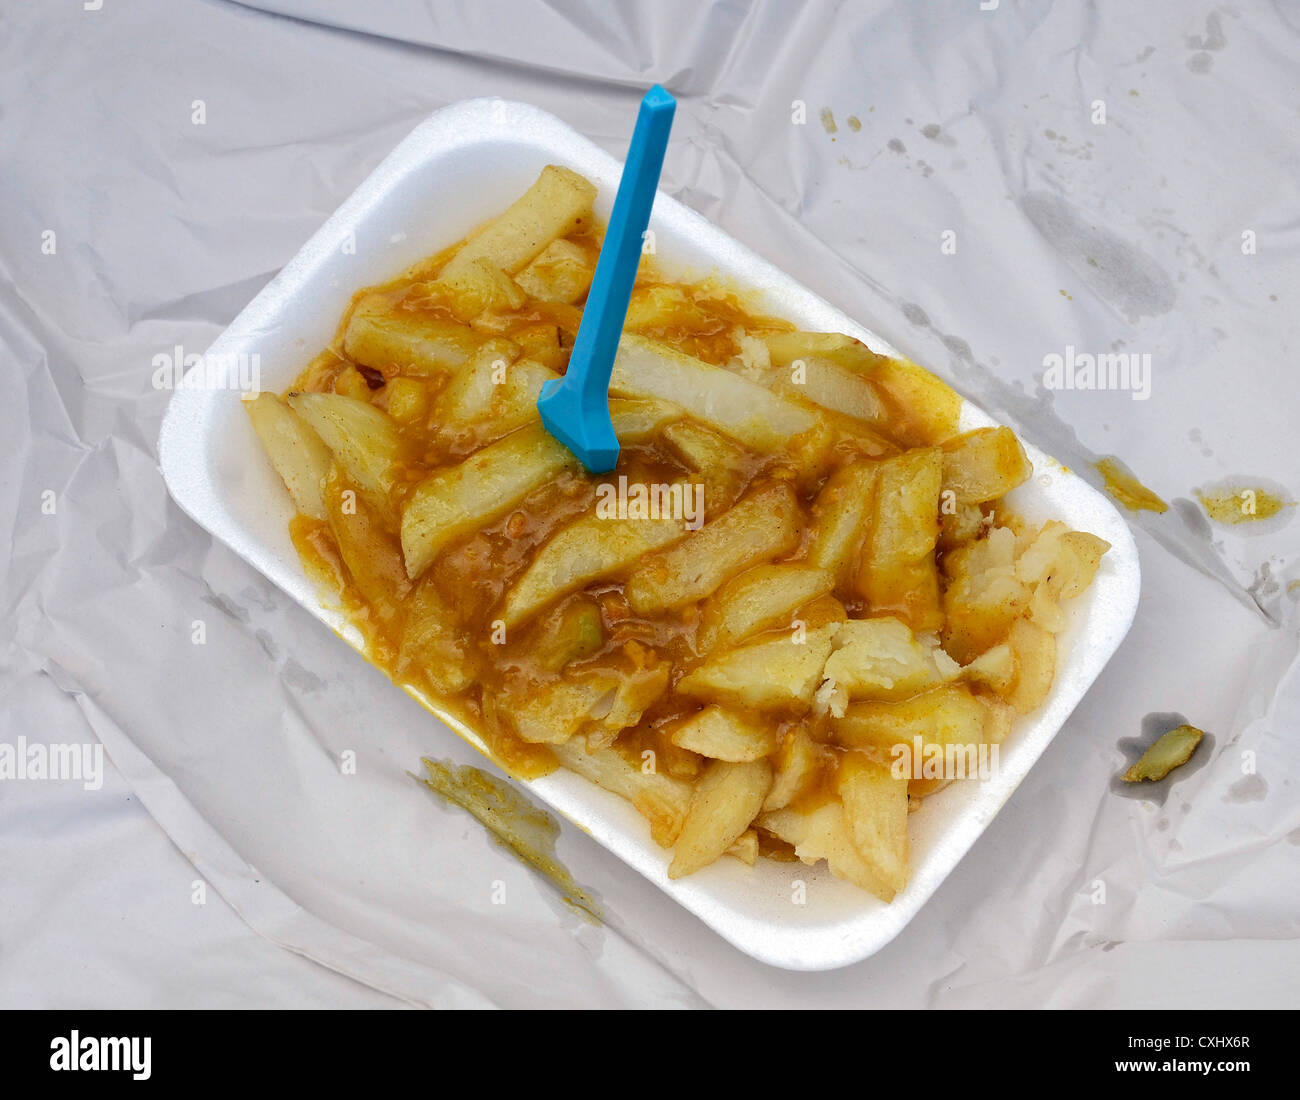 A takeaway curry and chips, england, uk Stock Photo